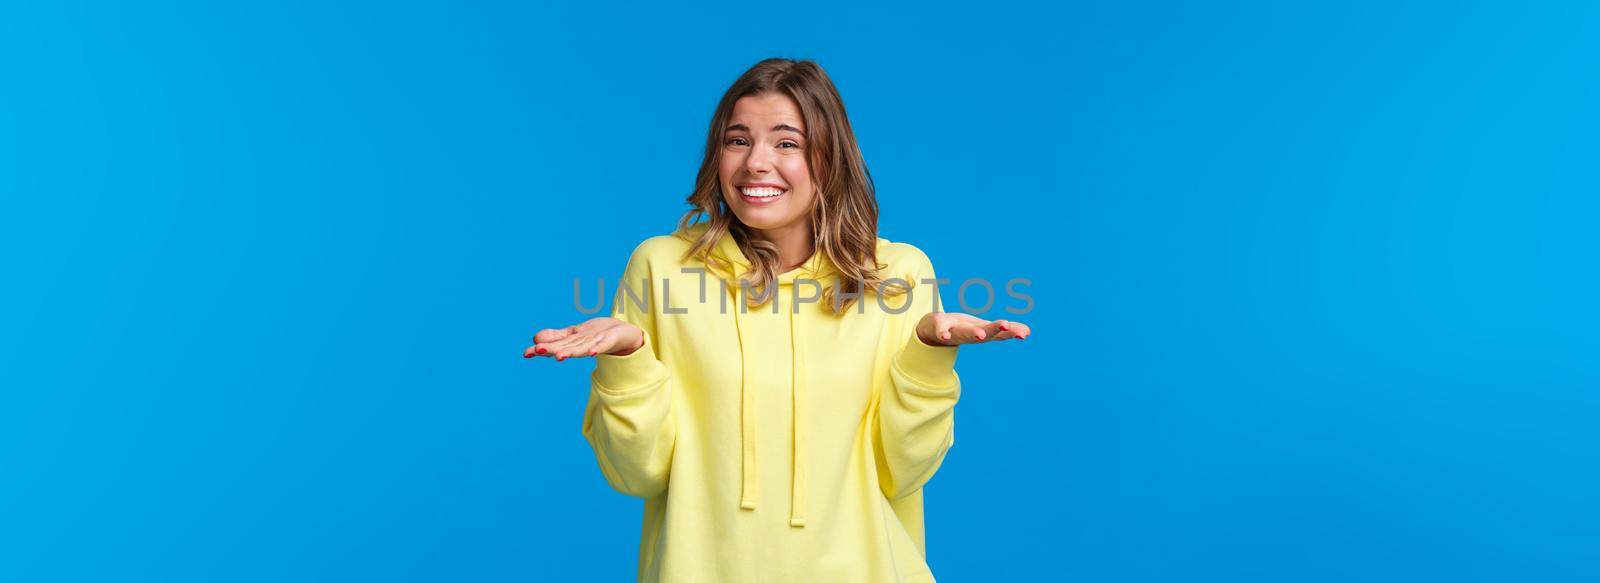 Oops sorry, no big deal. Carefree cute unbothered young blond girl making silly mistake and apologizing, say my bad shrugging and smiling embarassed, with awkward face, blue background by Benzoix